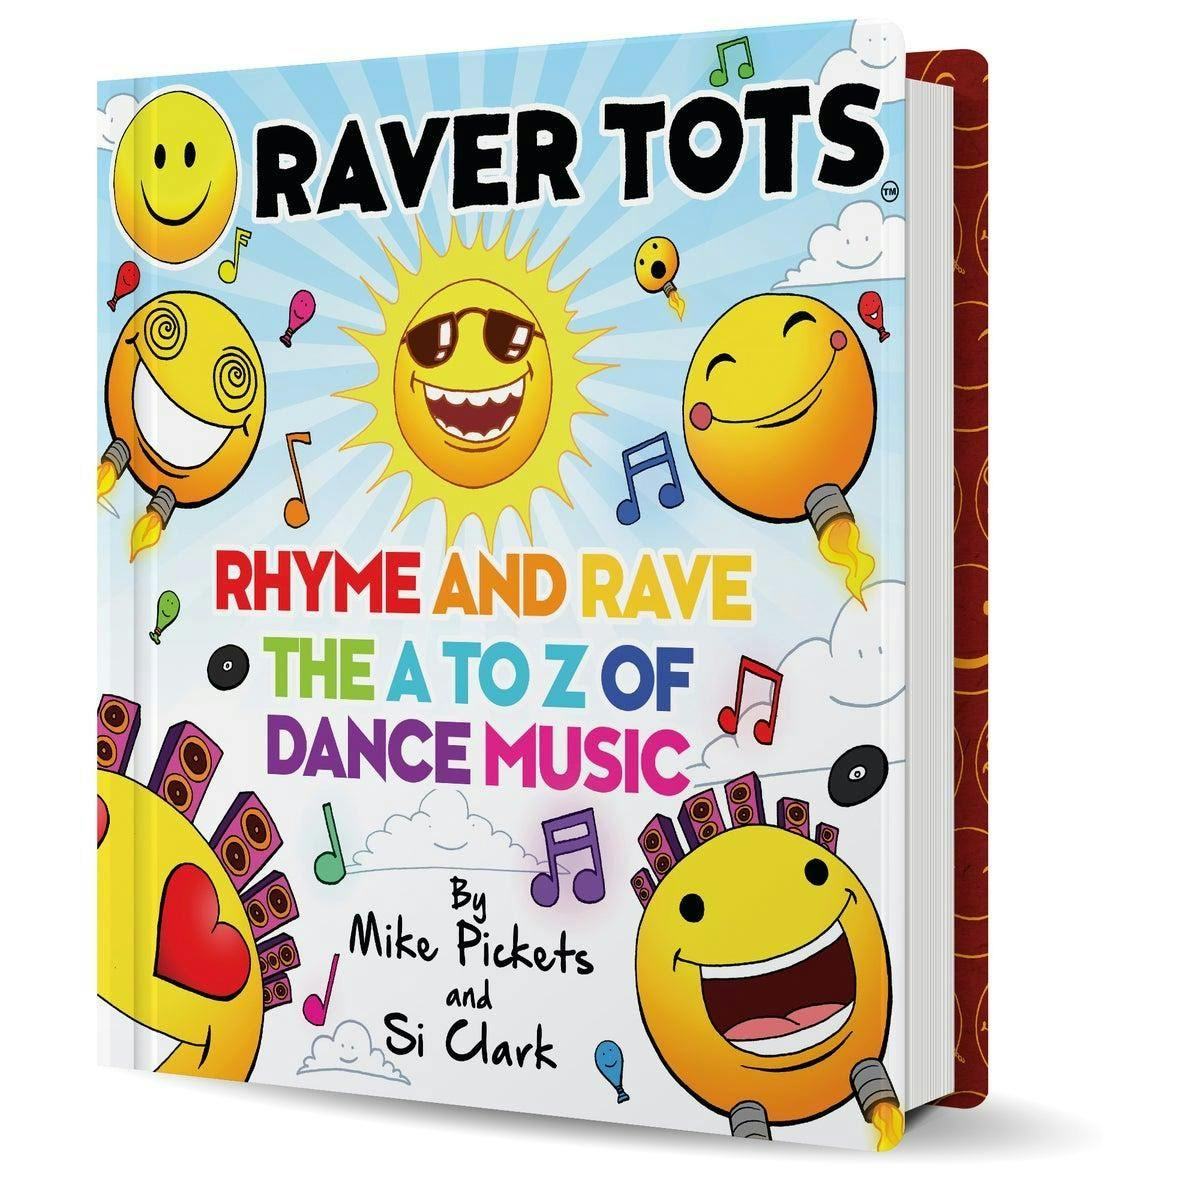 New Raver Tots Book and clothing range is out now!